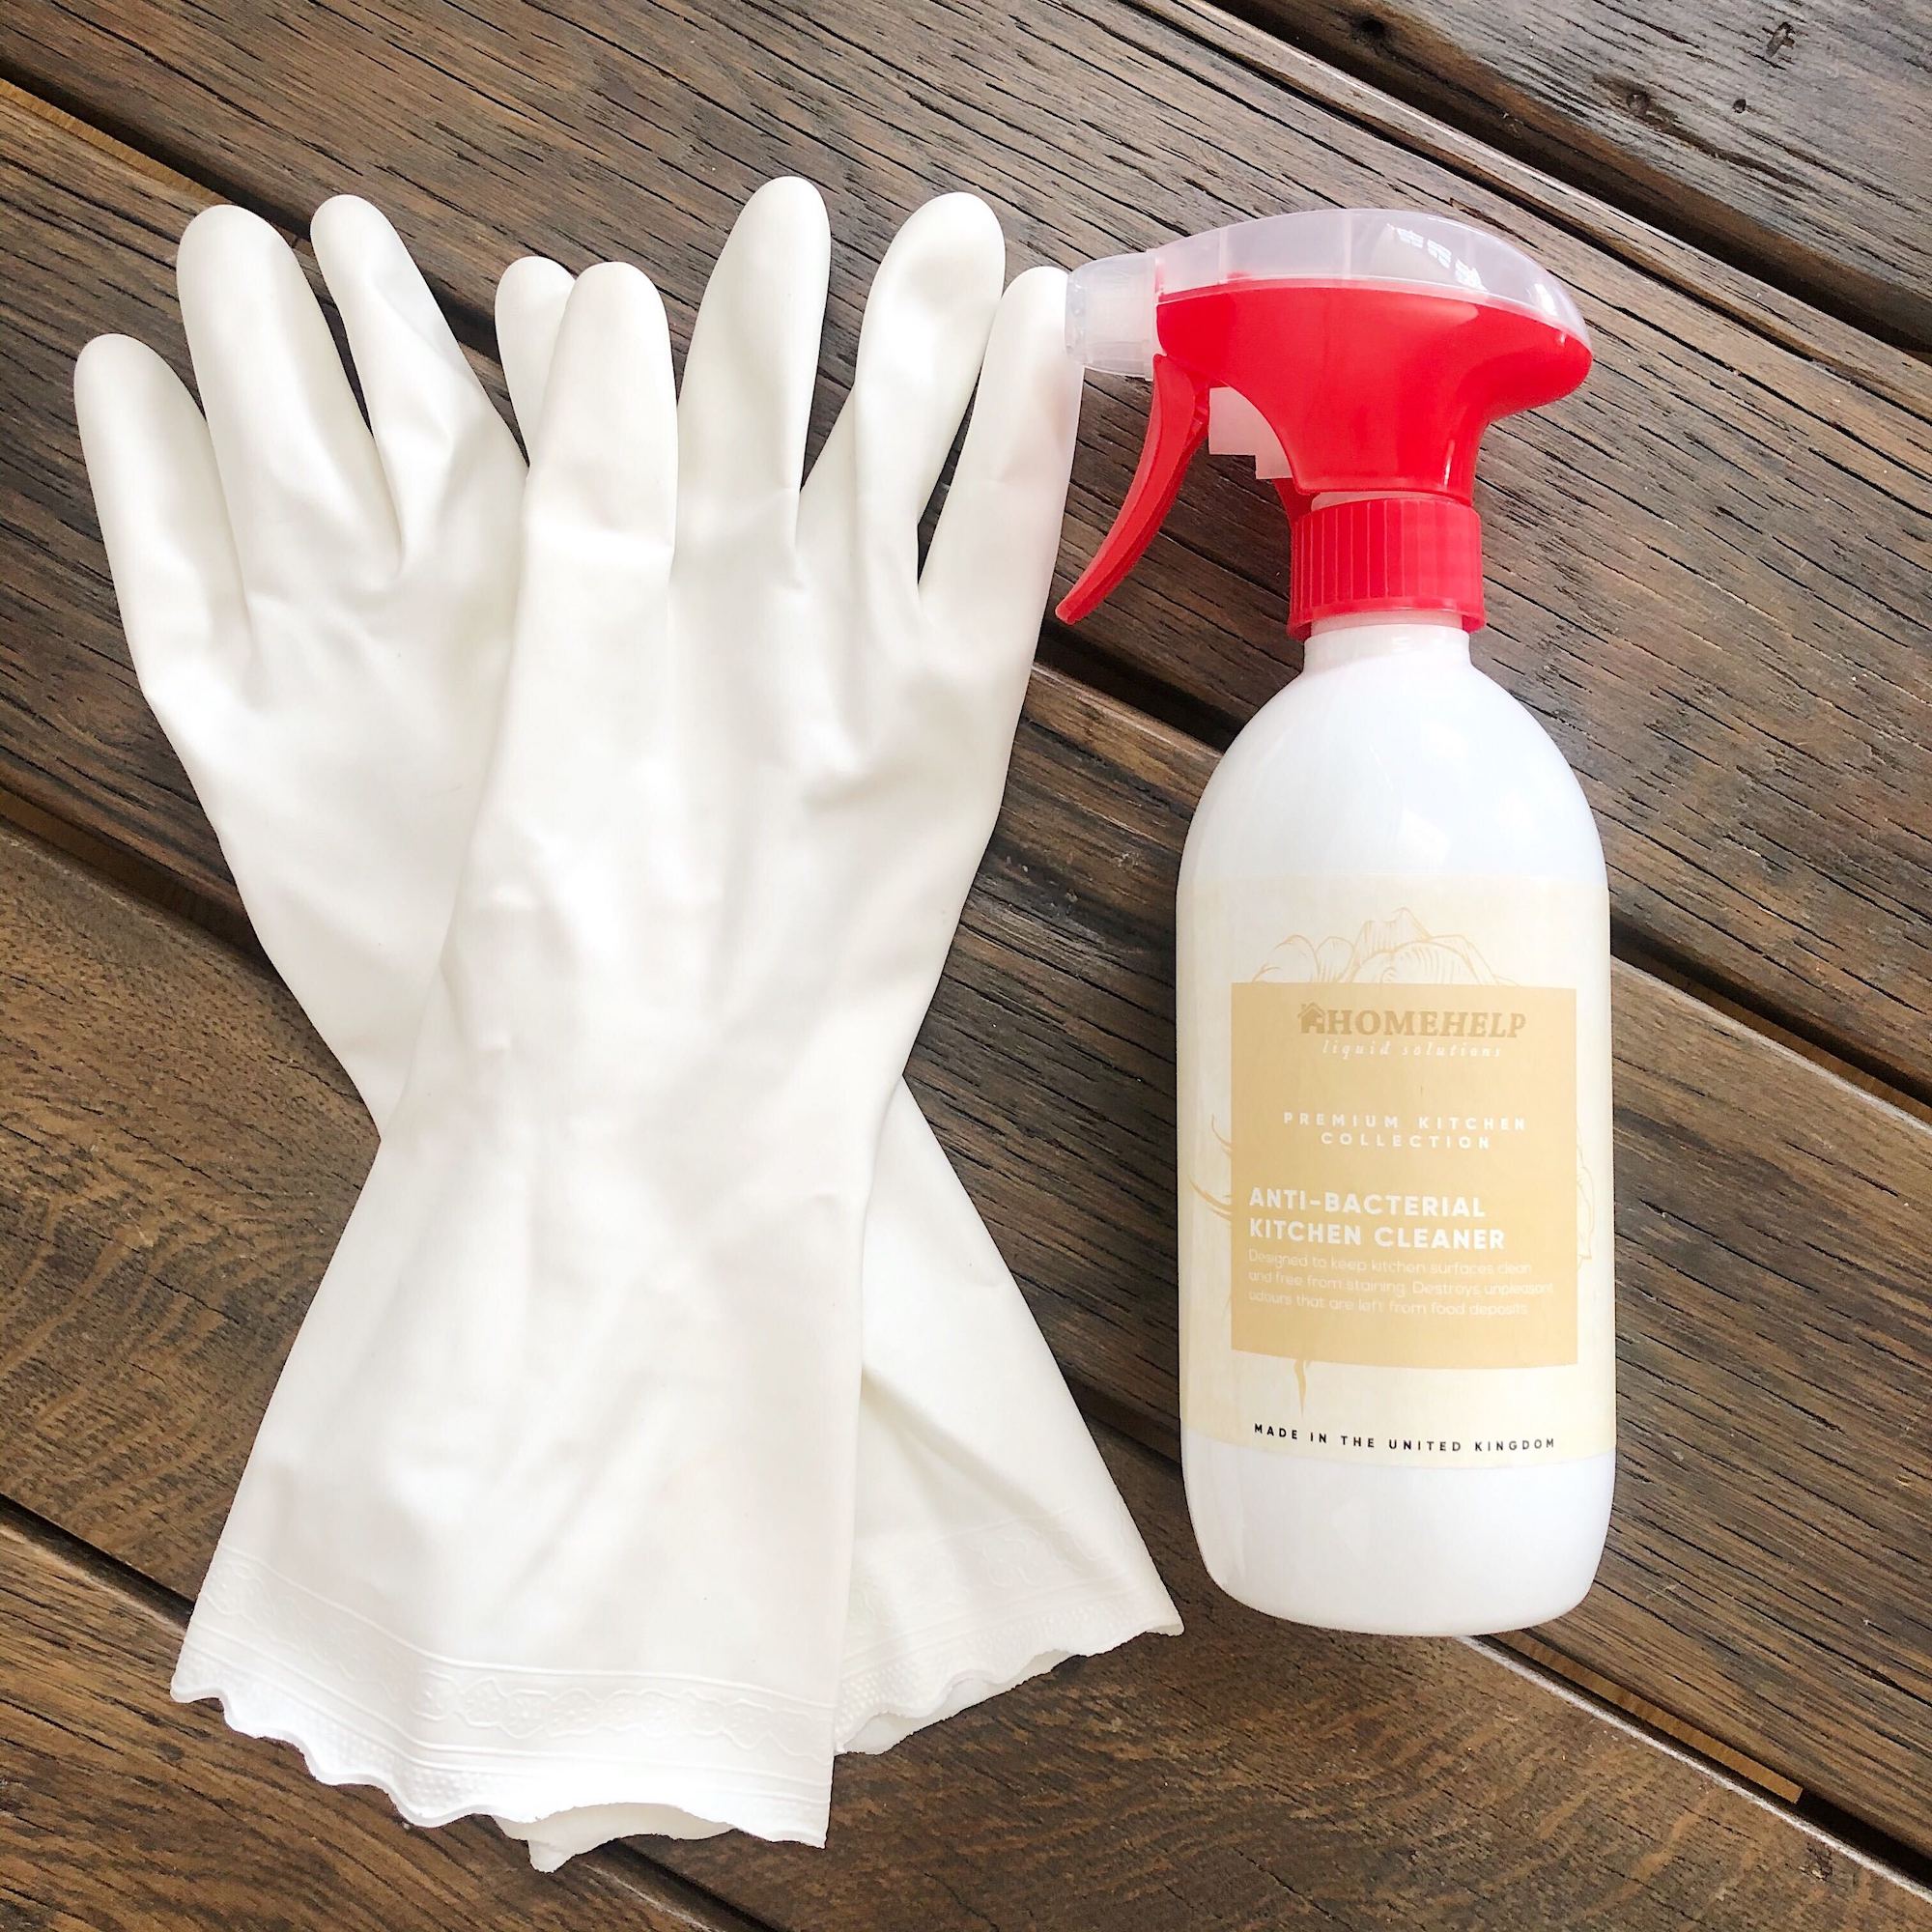 Anti-Bacterial Kitchen Cleaner